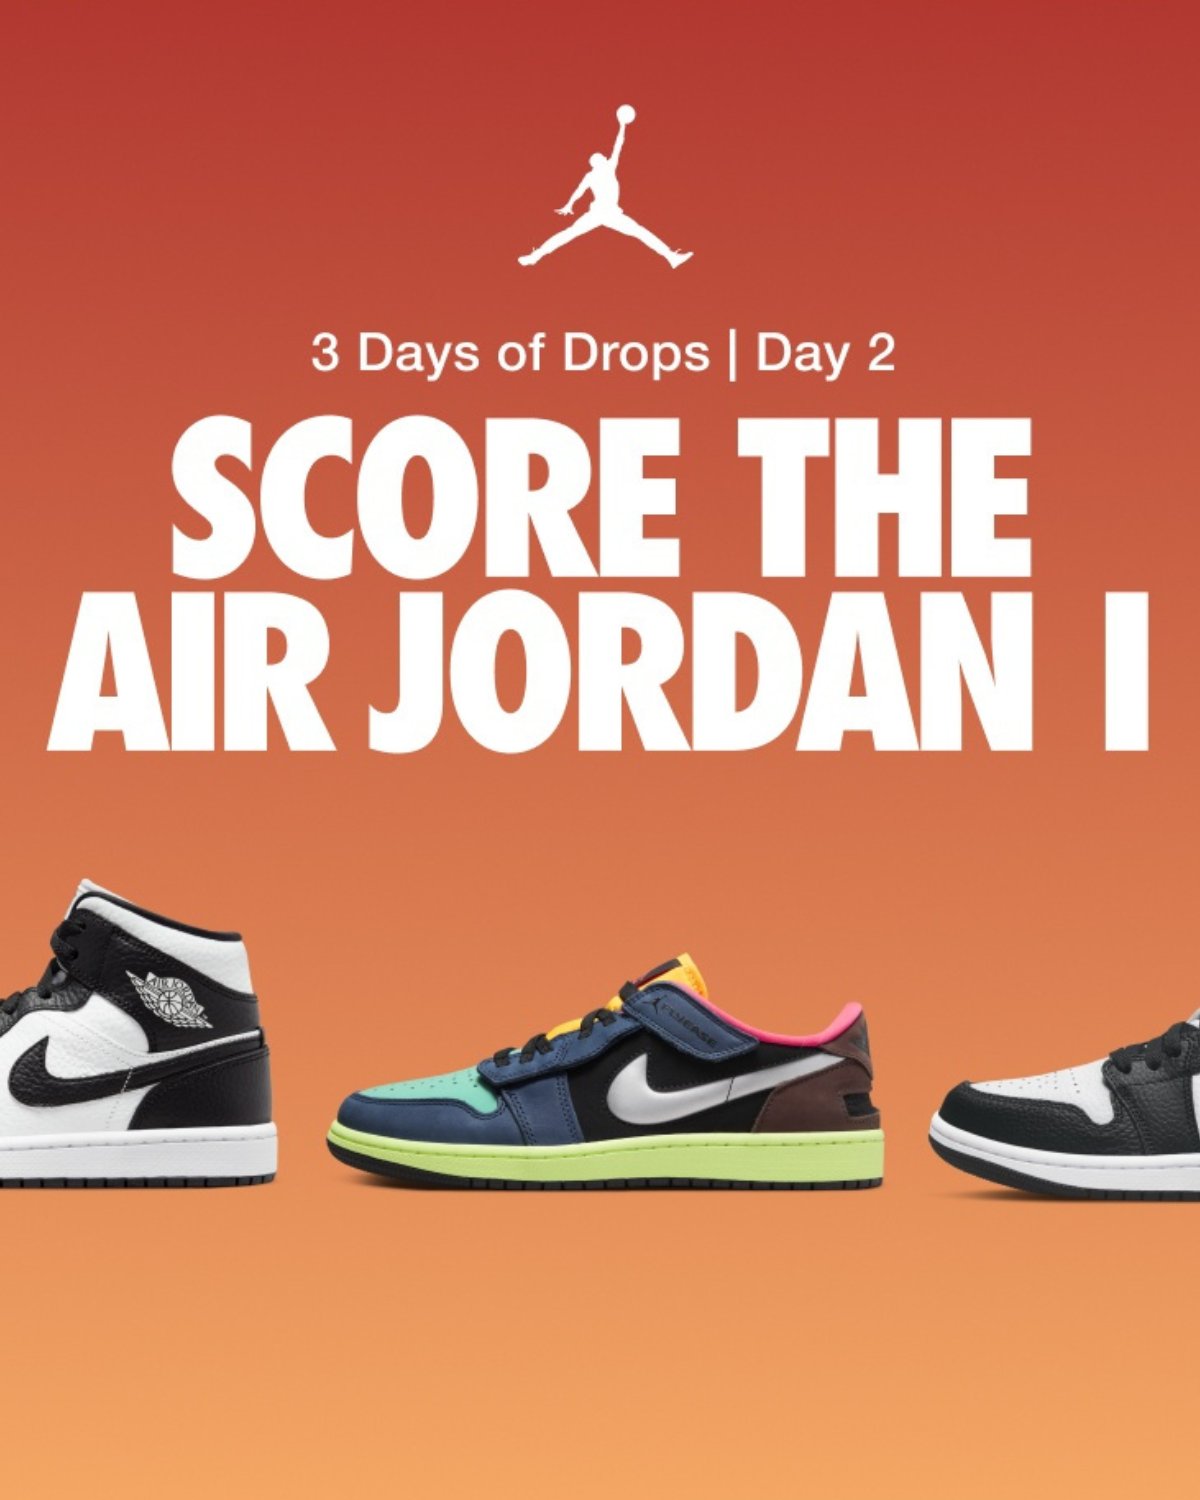 Nike.com on Twitter: "You ready for Day 2? The 💧 continues with the arrival legendary Air Jordan I in both Lows and Mids. to the Nike App to